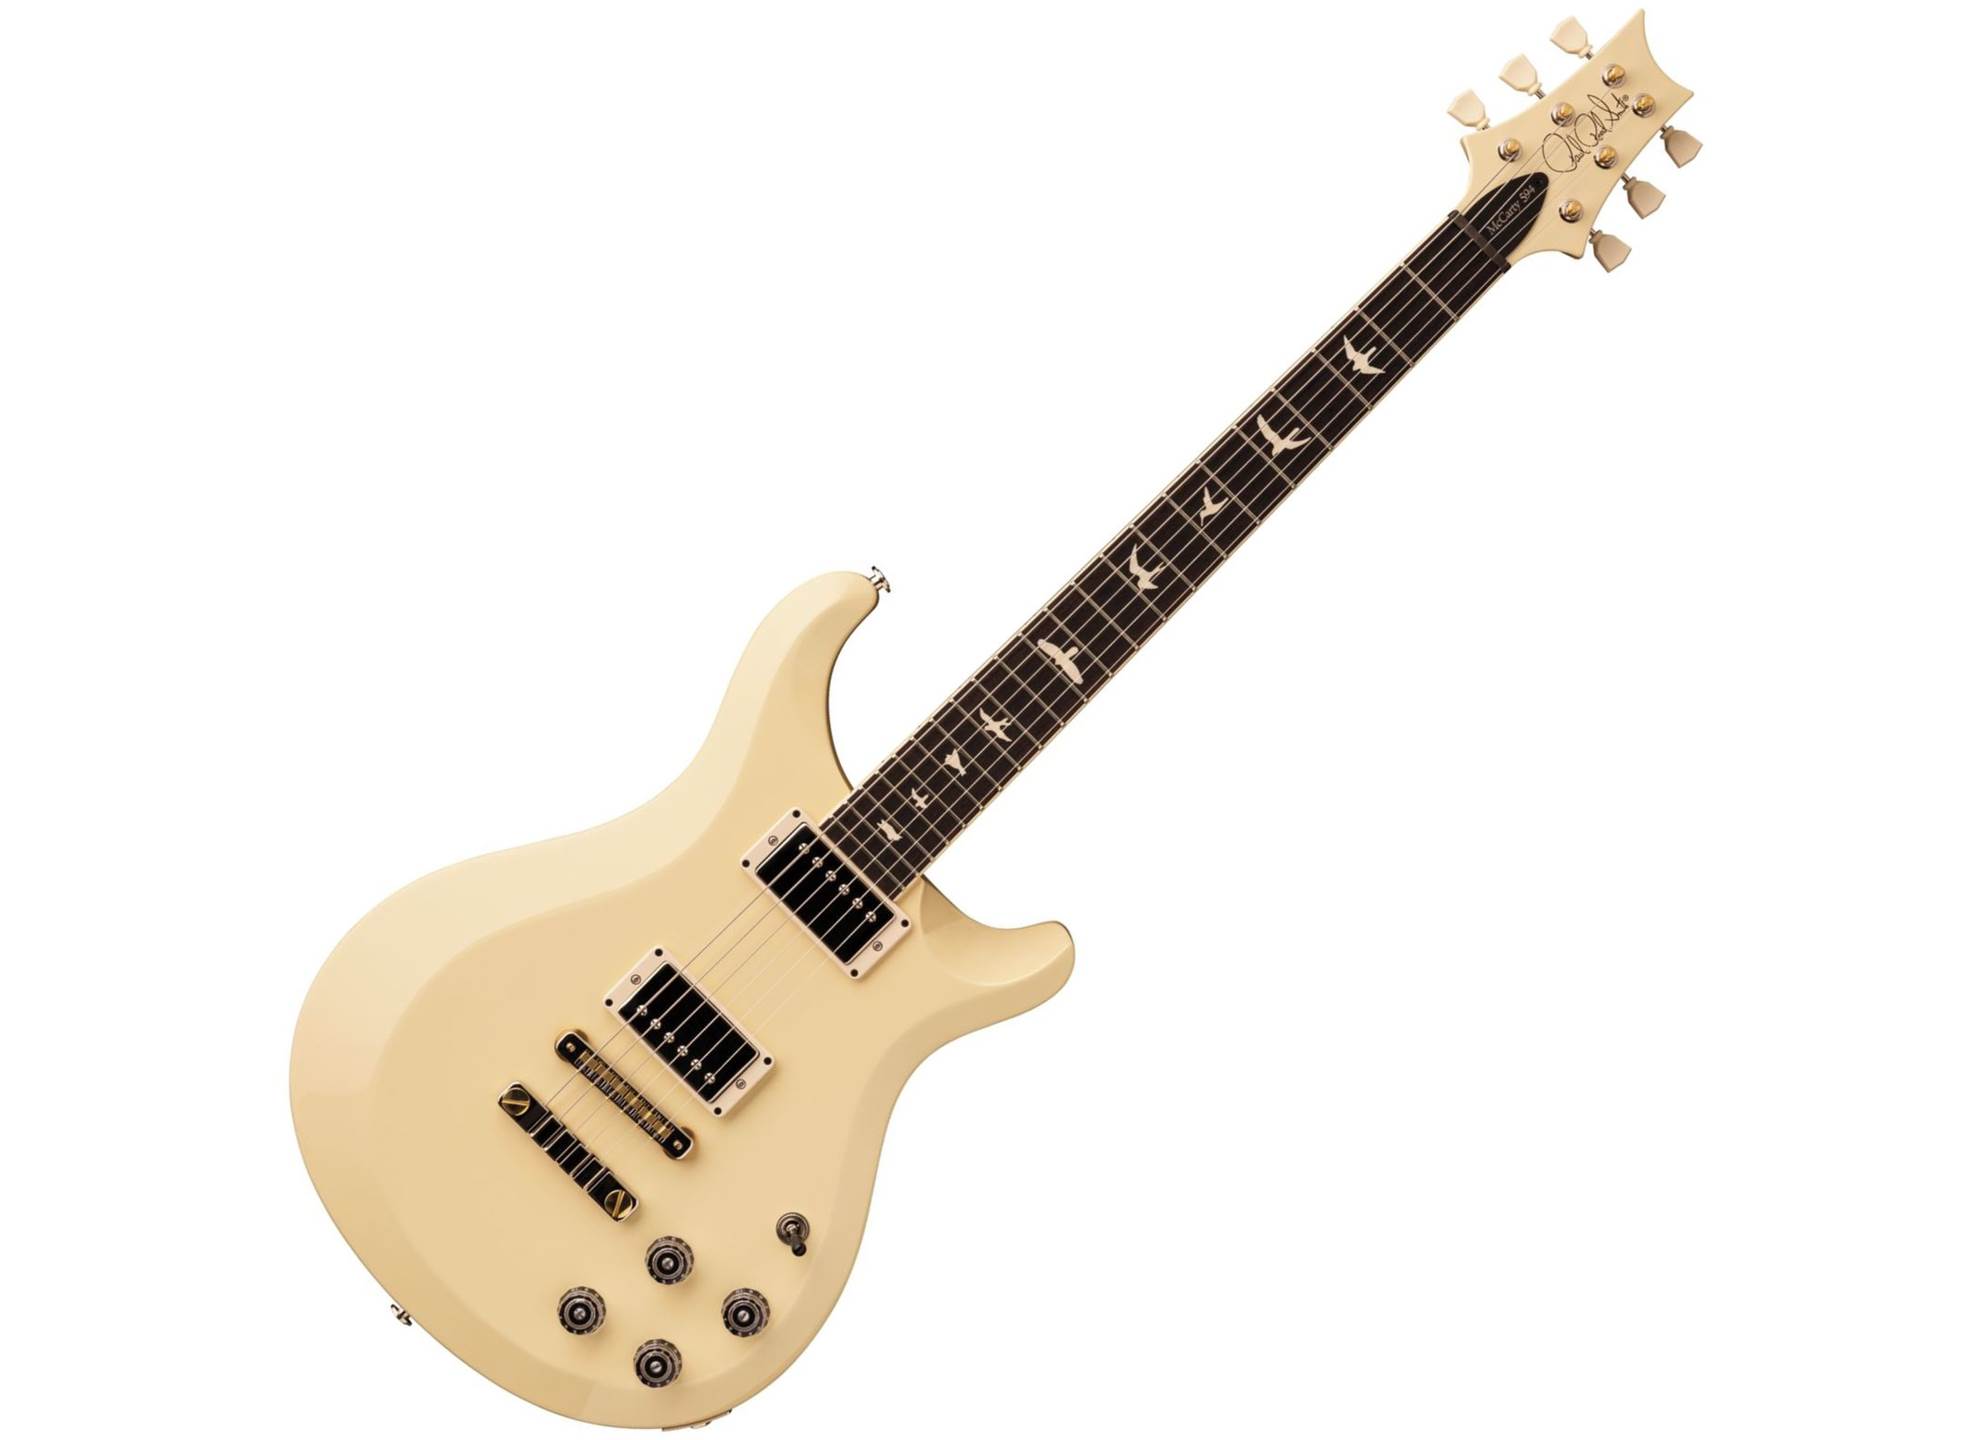 S2 McCarty 594 Thinline Antique White